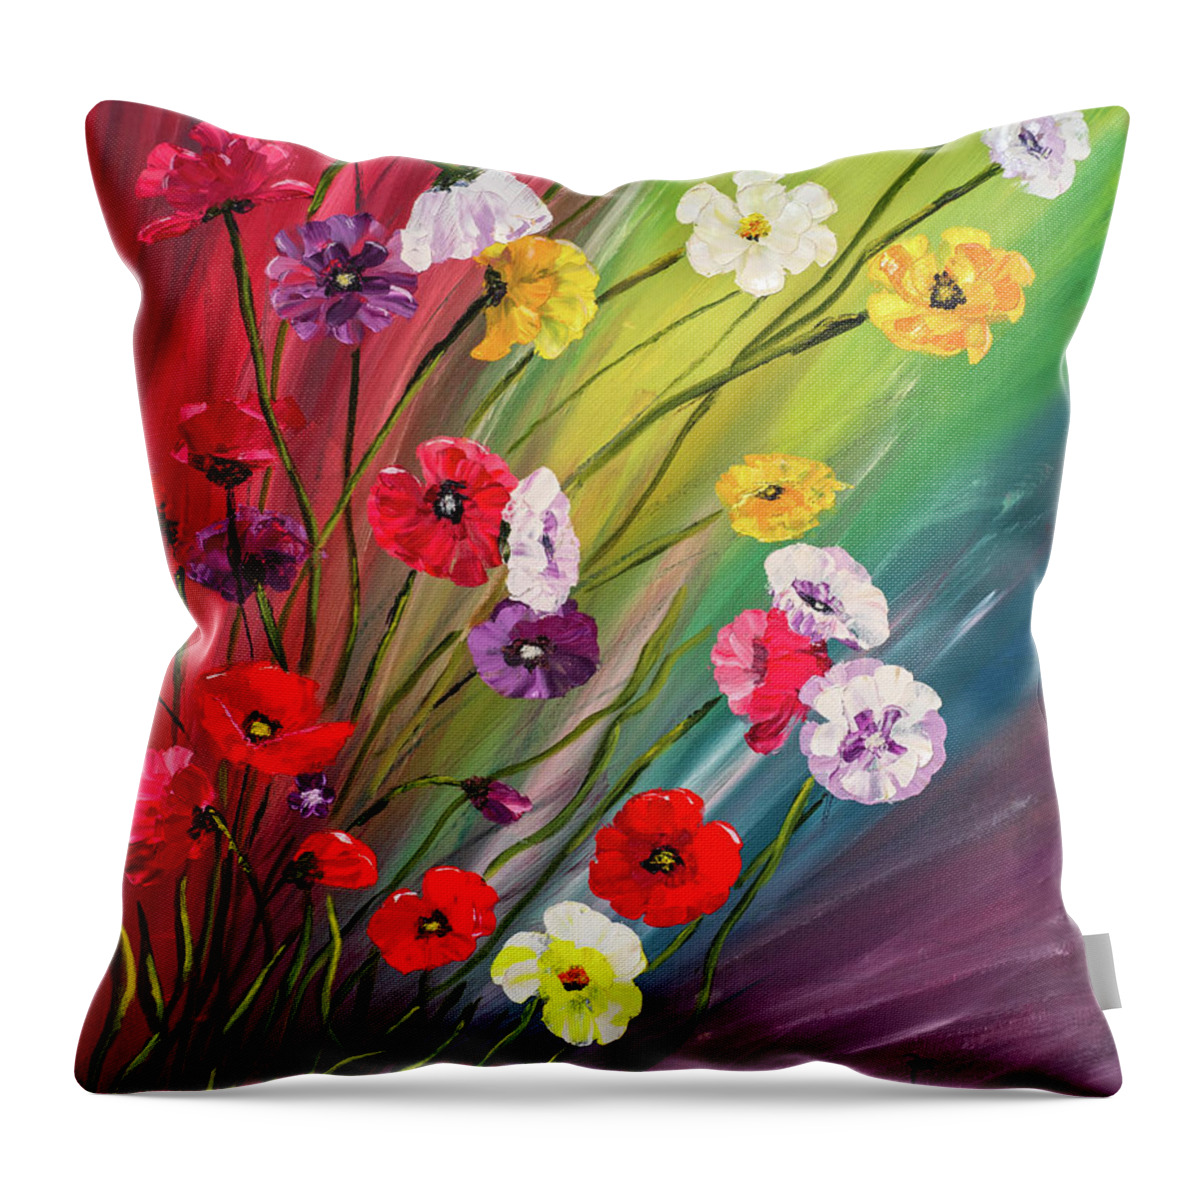 Flowers Throw Pillow featuring the painting Spring Flowers by Mark Ross